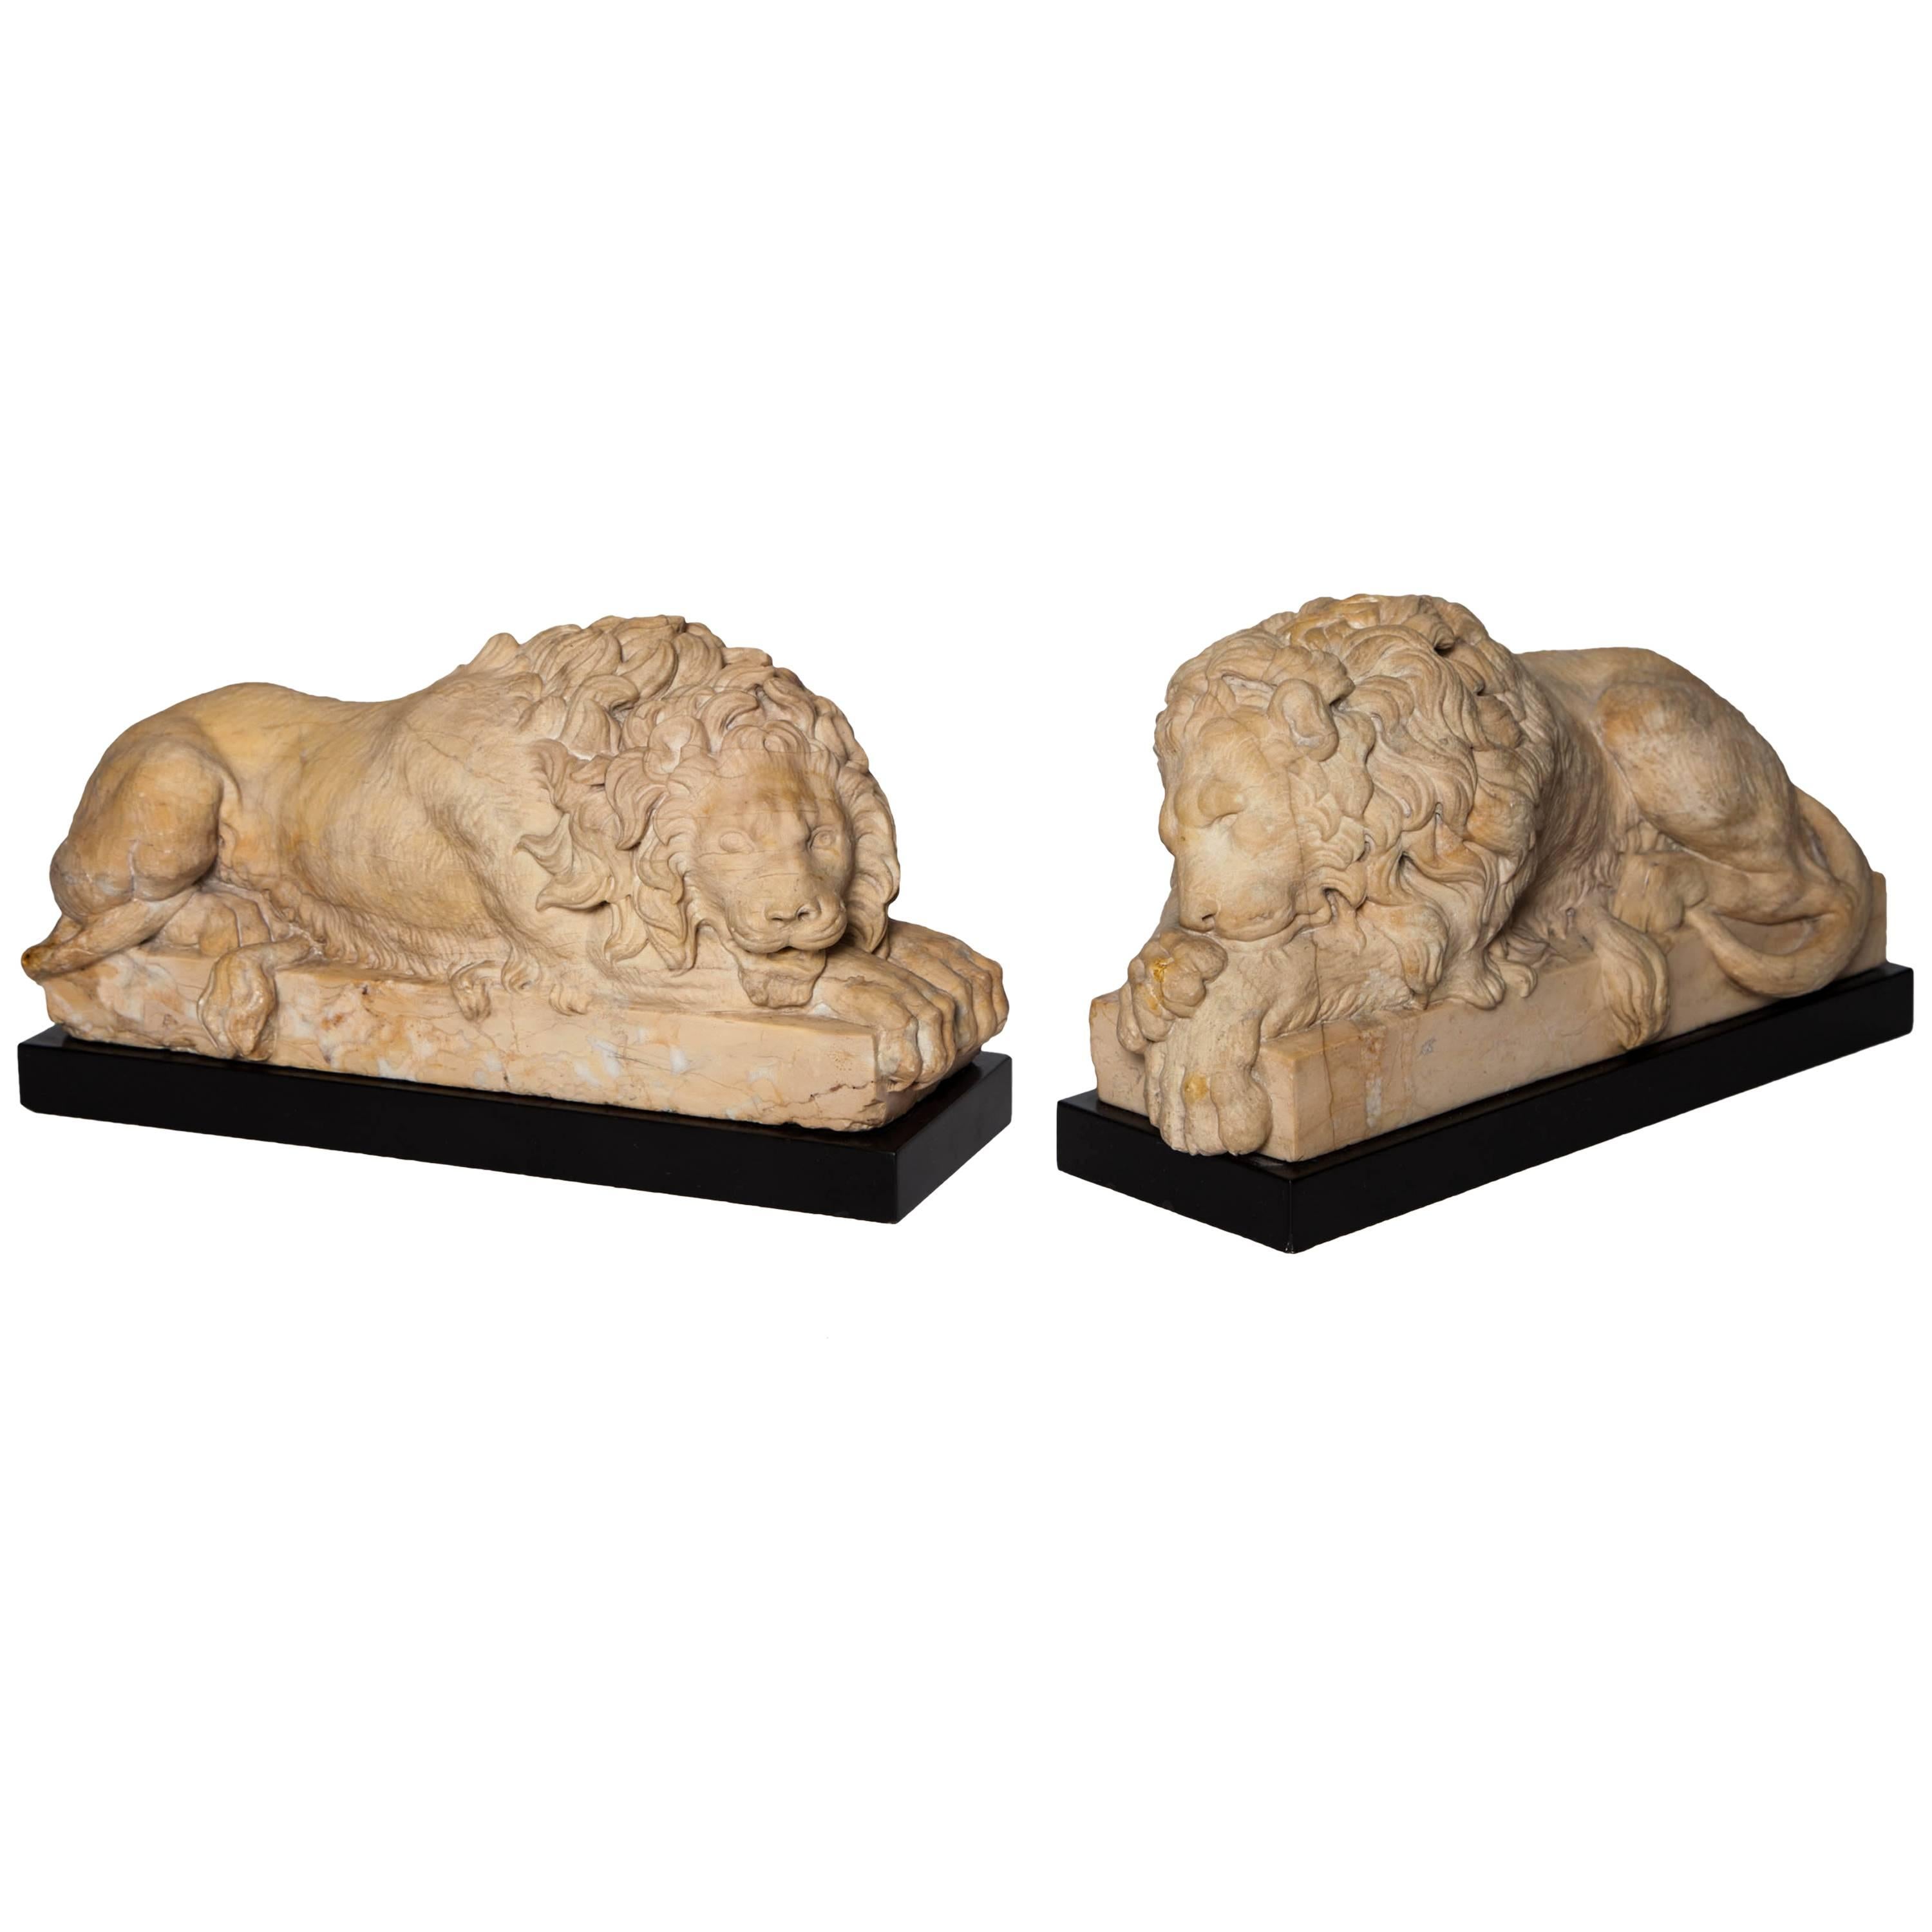 Pair of Grand Tour Period, Roman Sienna Marble Recumbent Lions after Canova